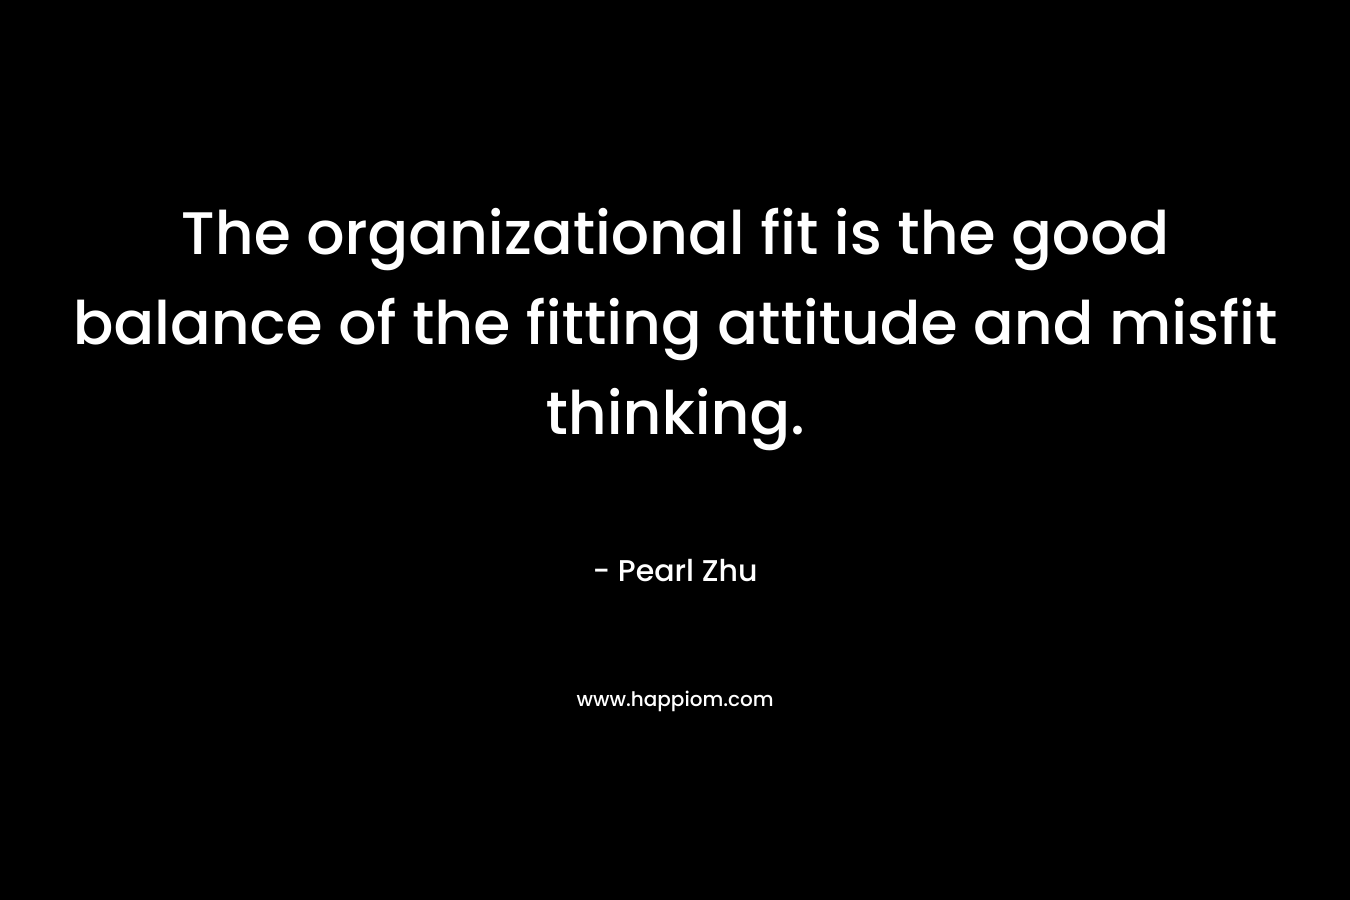 The organizational fit is the good balance of the fitting attitude and misfit thinking.